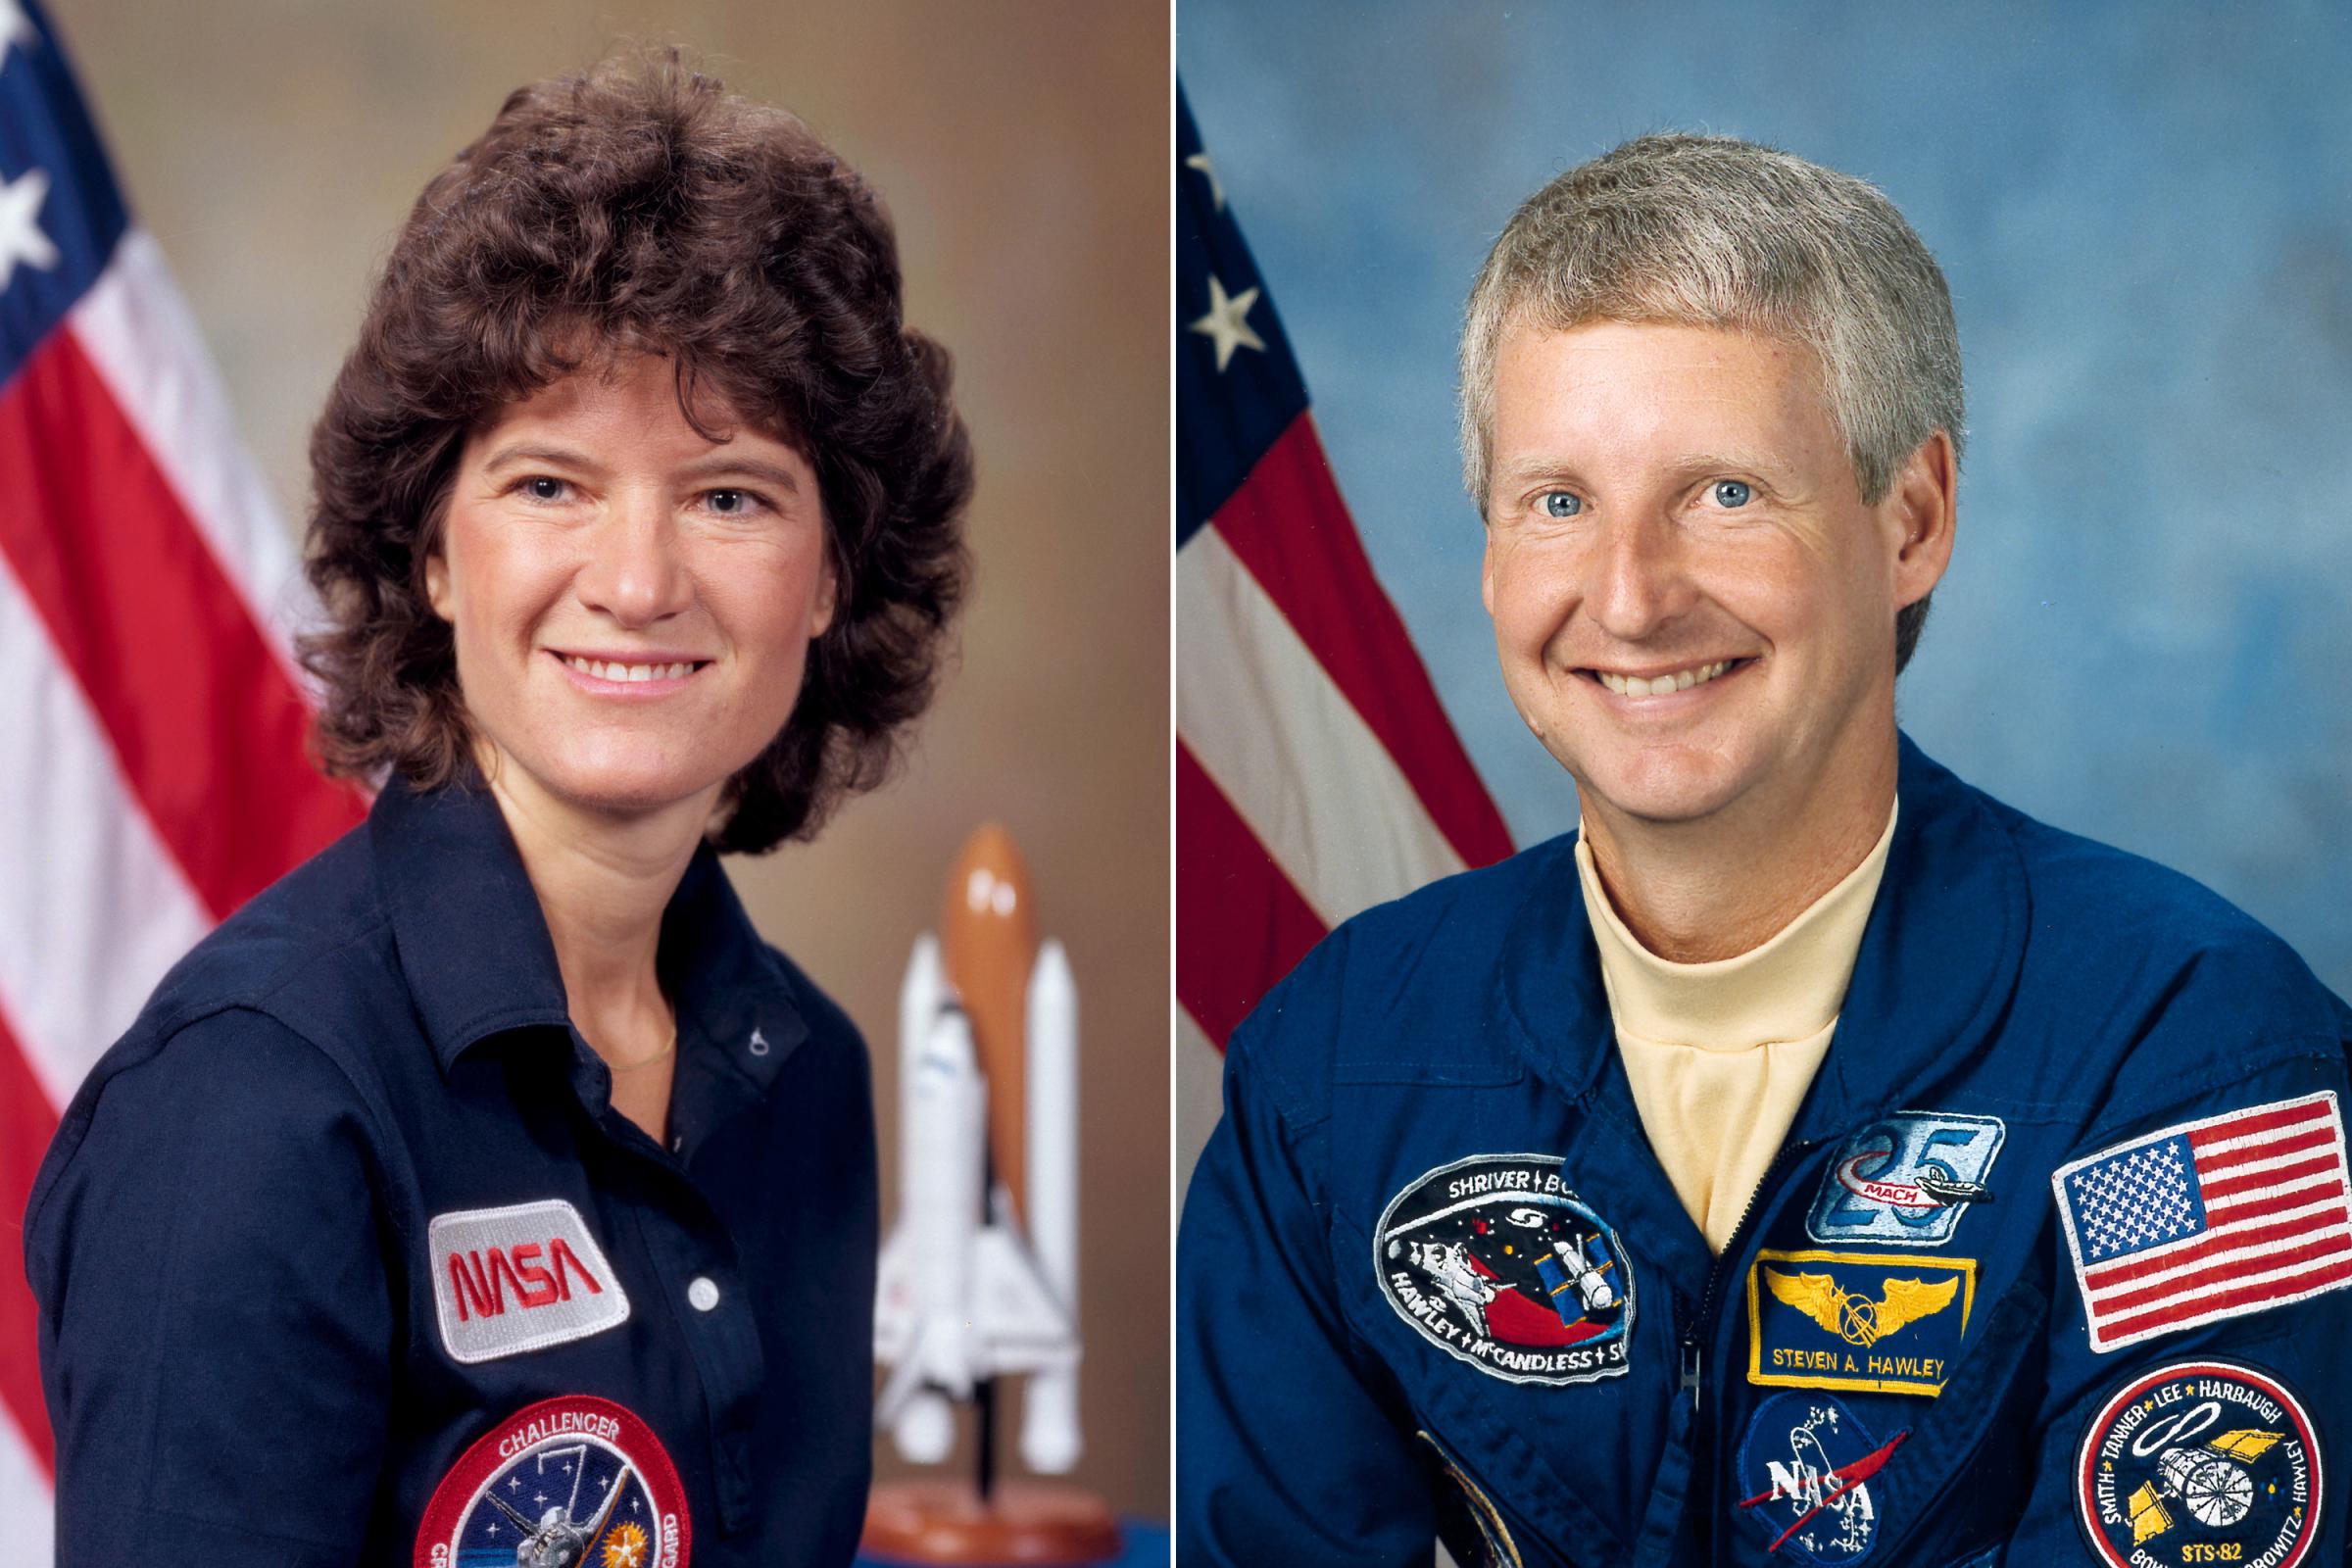 Sally Ride and Steven Hawley were married for 5 years from 1982 until 1987. Sally Ride was the first American woman to go into space, flying on the space shuttle Challenger on June 18, 1983. Ride spent 27 years with the person she truly loved, Tam O'Shaughnessy, a science writer and co-founder of the science education company Sally Ride Science. Though they never married, they remained partners until Ride's passing in 2012.